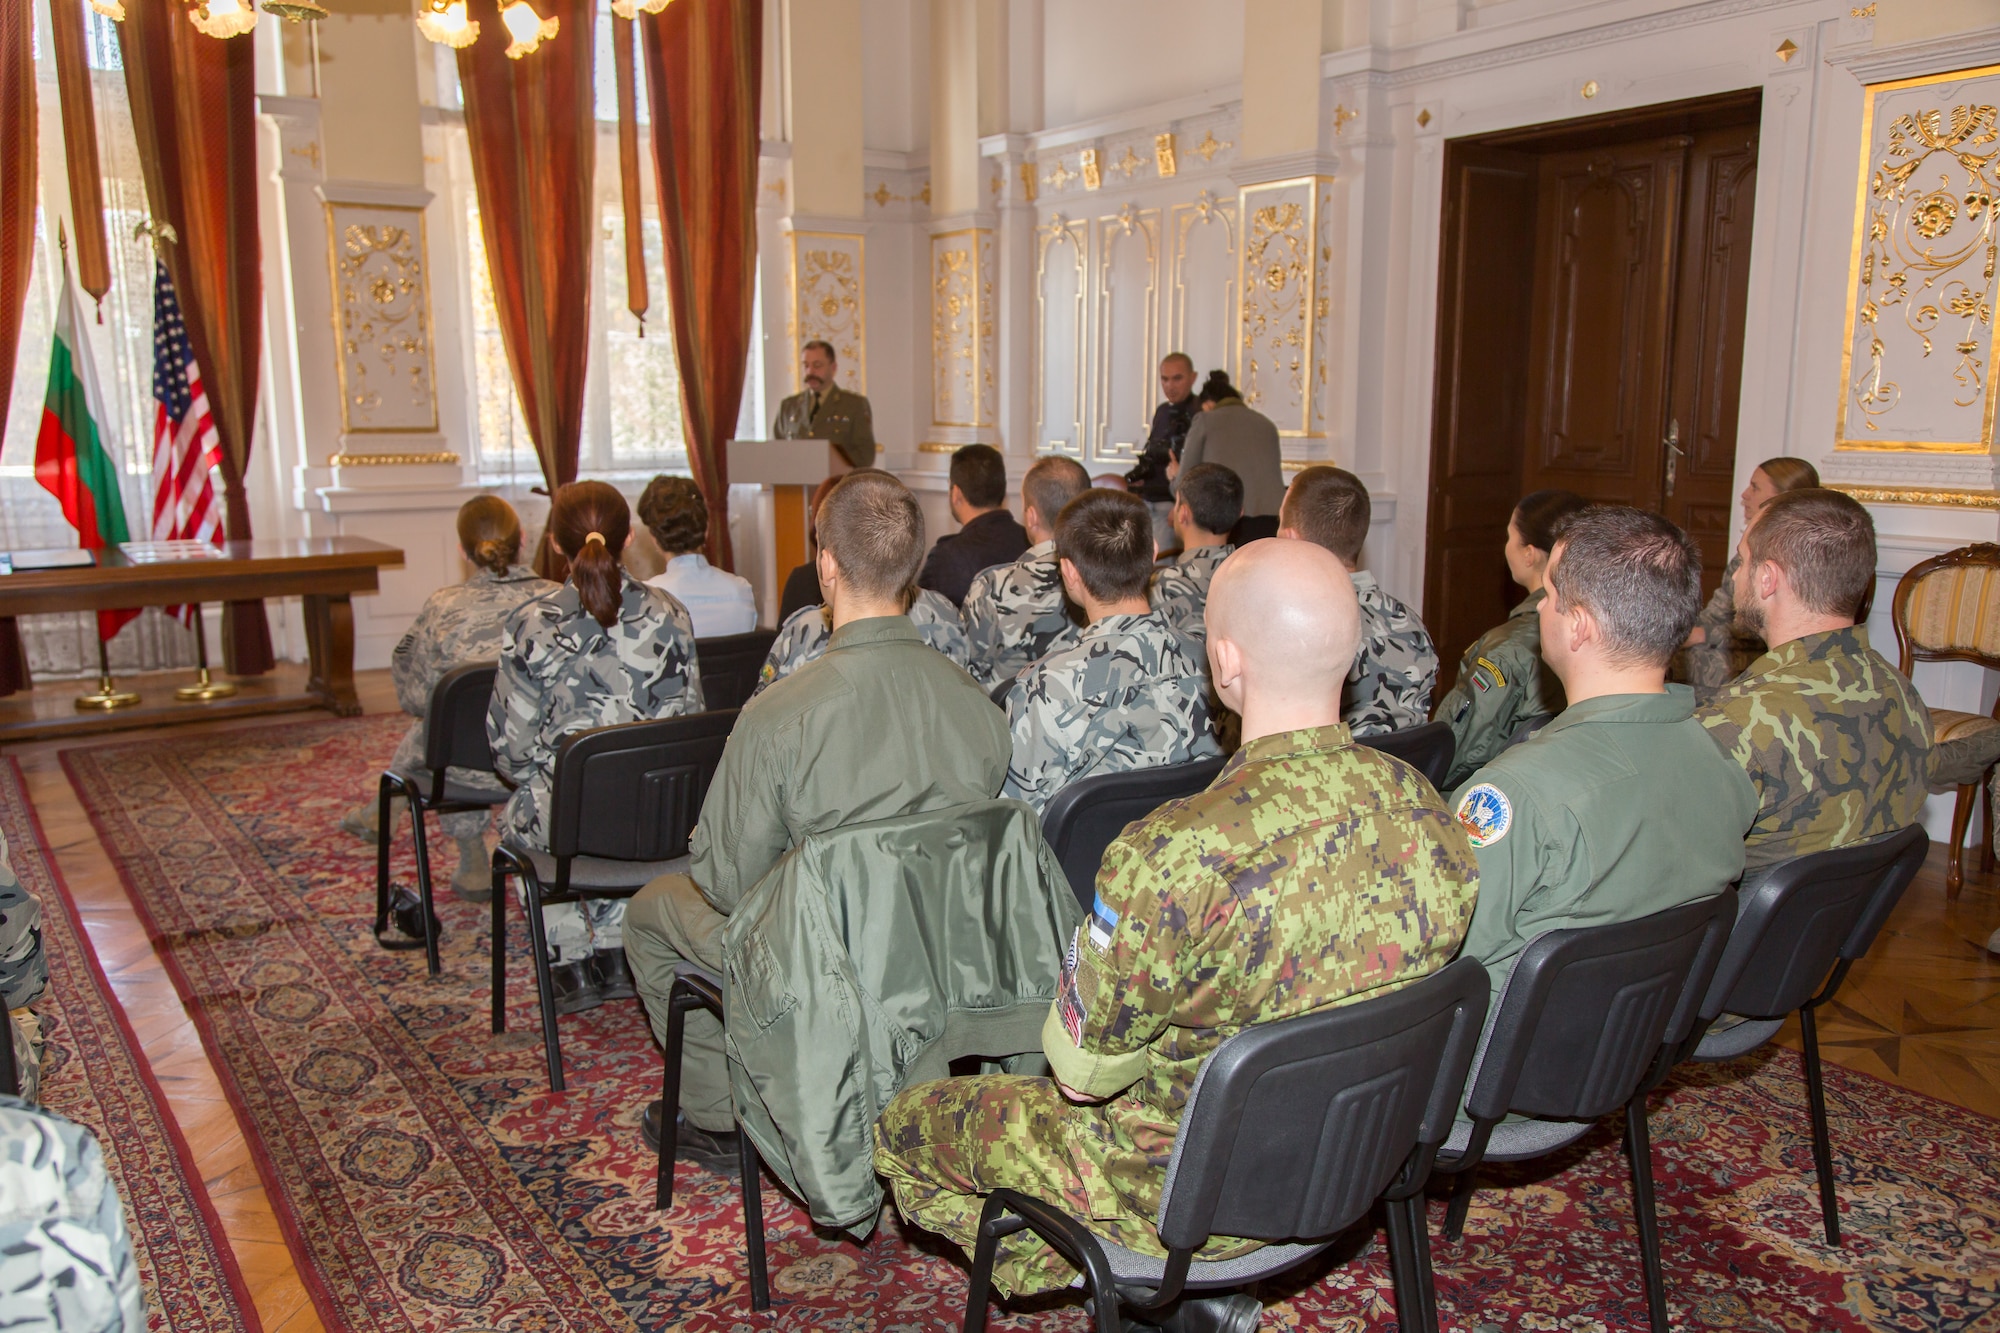 Major General Todor Dotchev, Commander Bulgarian Rakovski Defense Staff College, addresses students from the first ever IEAFA combined international officer and NCO PME course graduation held in Sofia, Bulgaria, Nov. 13, 2015.  Twenty-three students from Bulgaria, Czech Republic, Estonia, and Hungary participated in this inagural course. (U.S. Air Force photo/SMSgt Travis Robbins/Released)